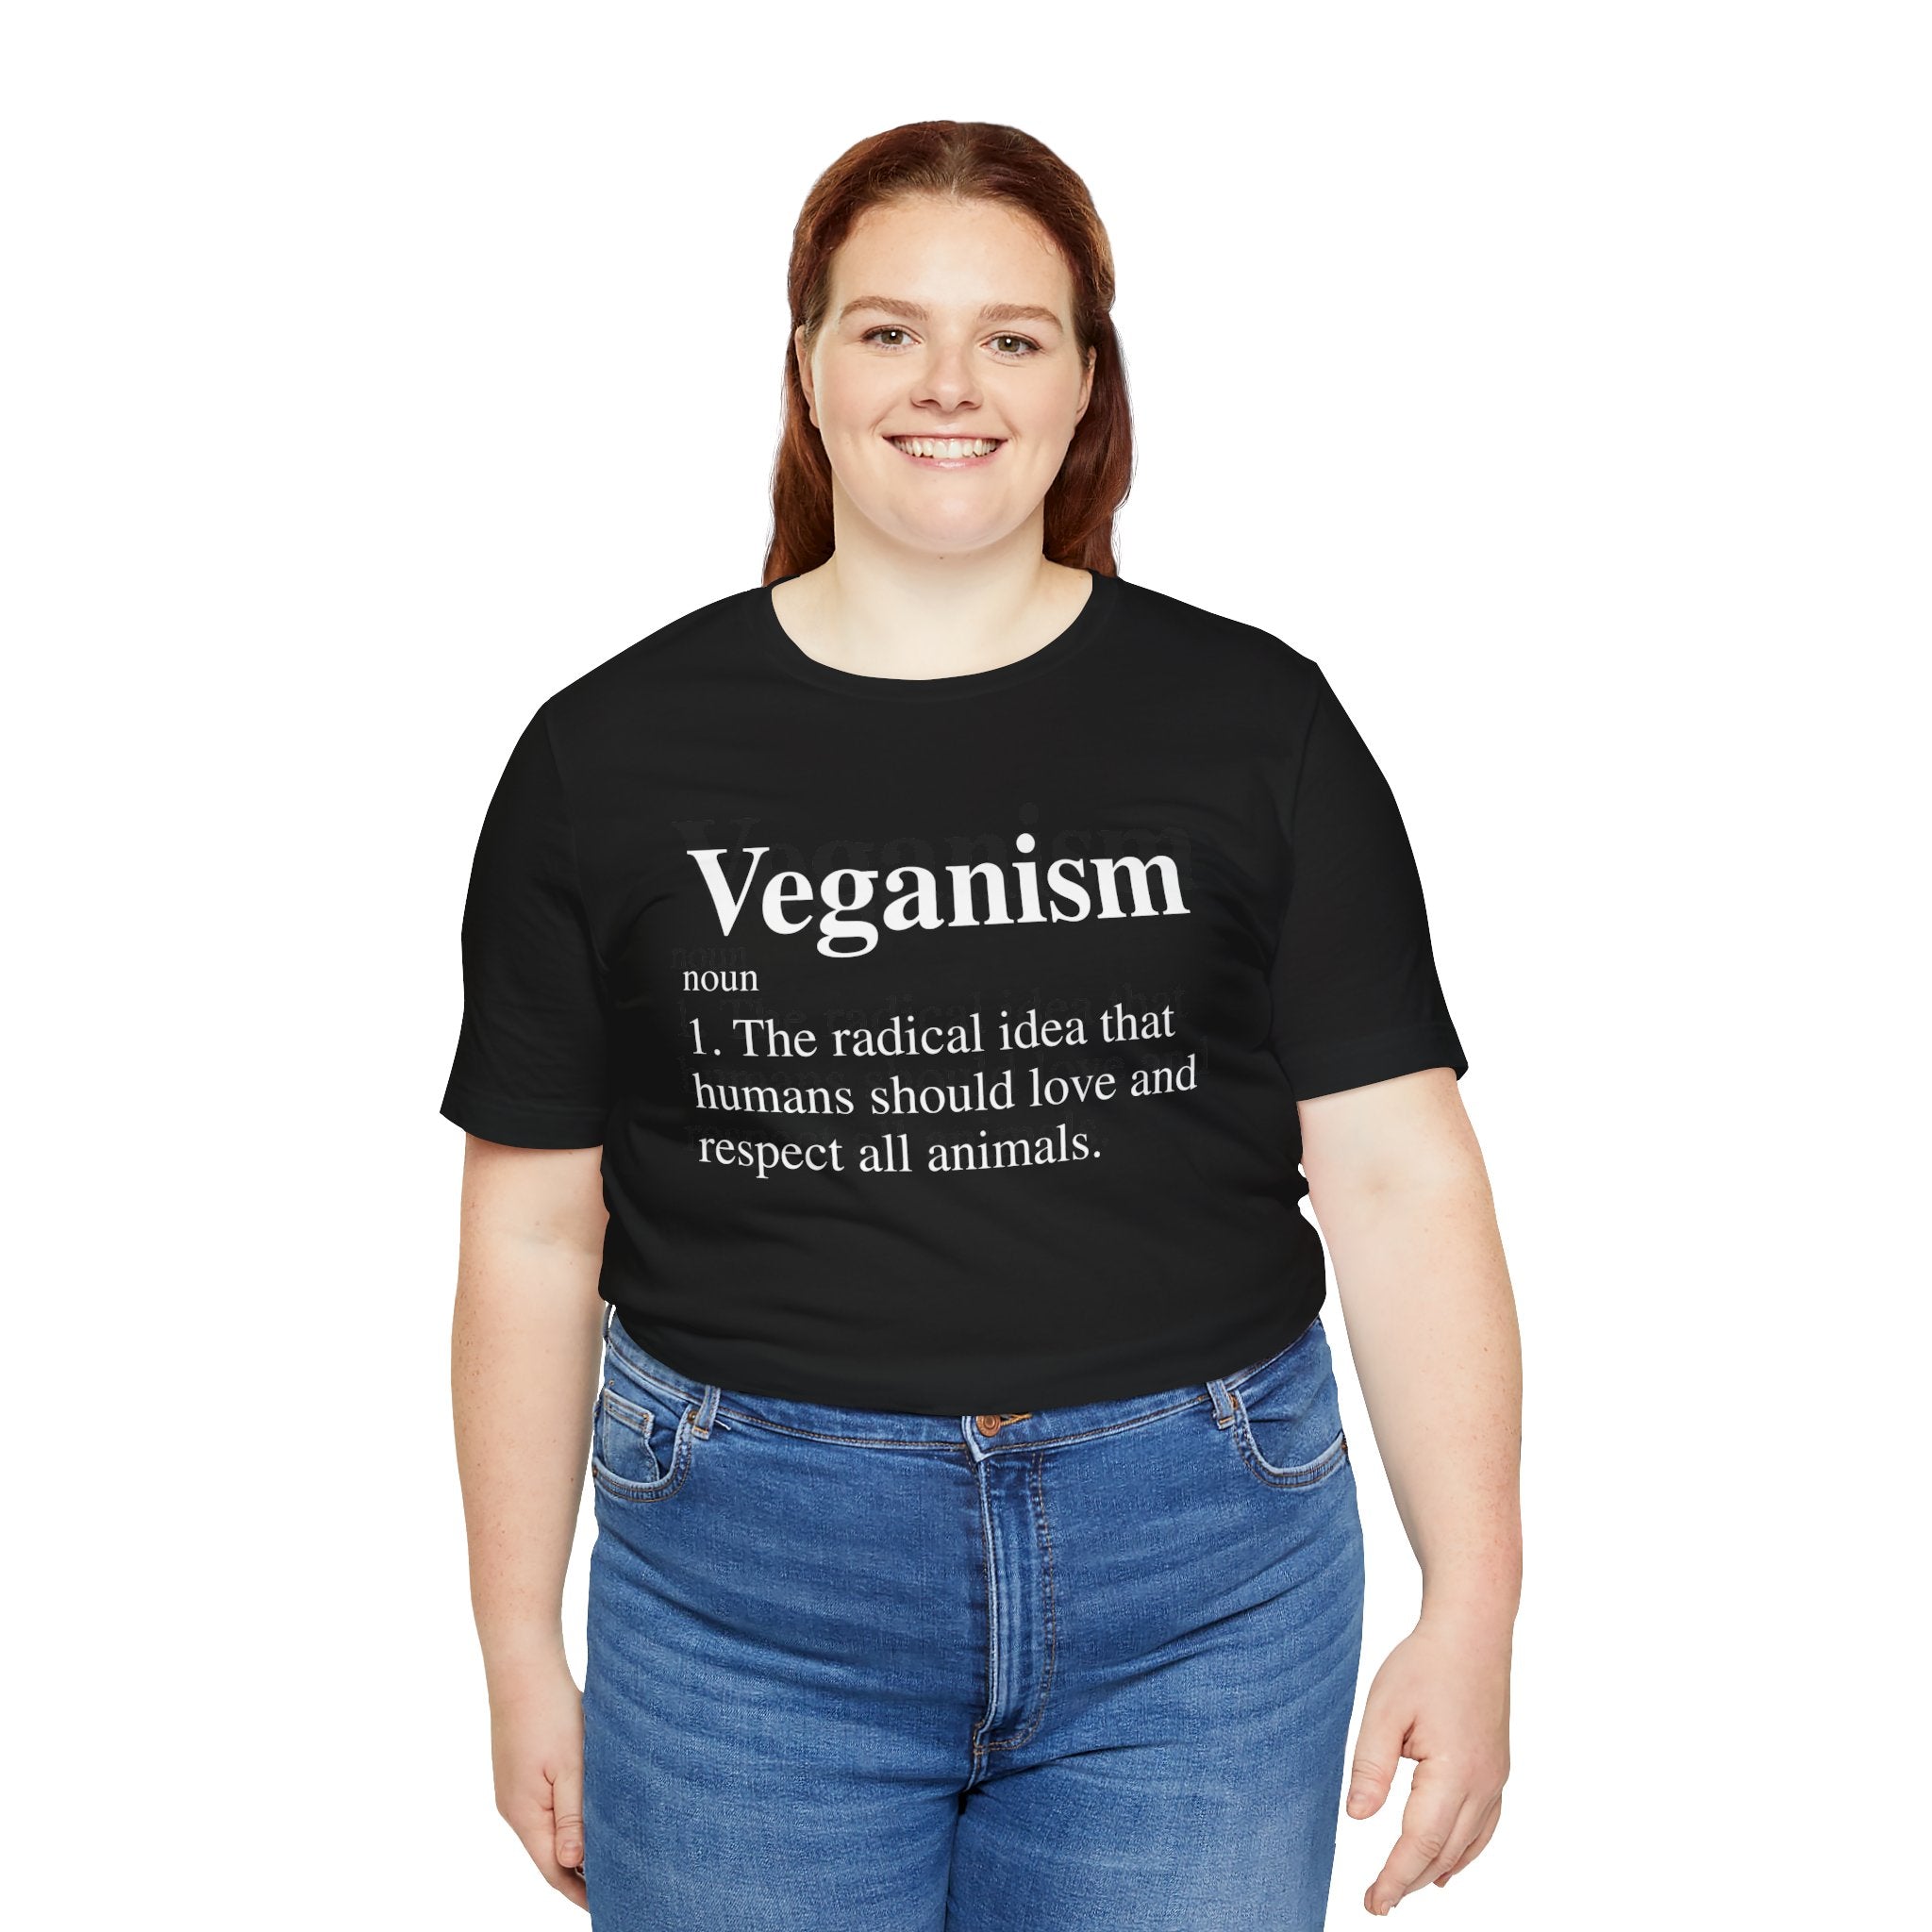 A woman with long hair wearing a black Veganism T-Shirt, paired with blue jeans, smiling at the camera.